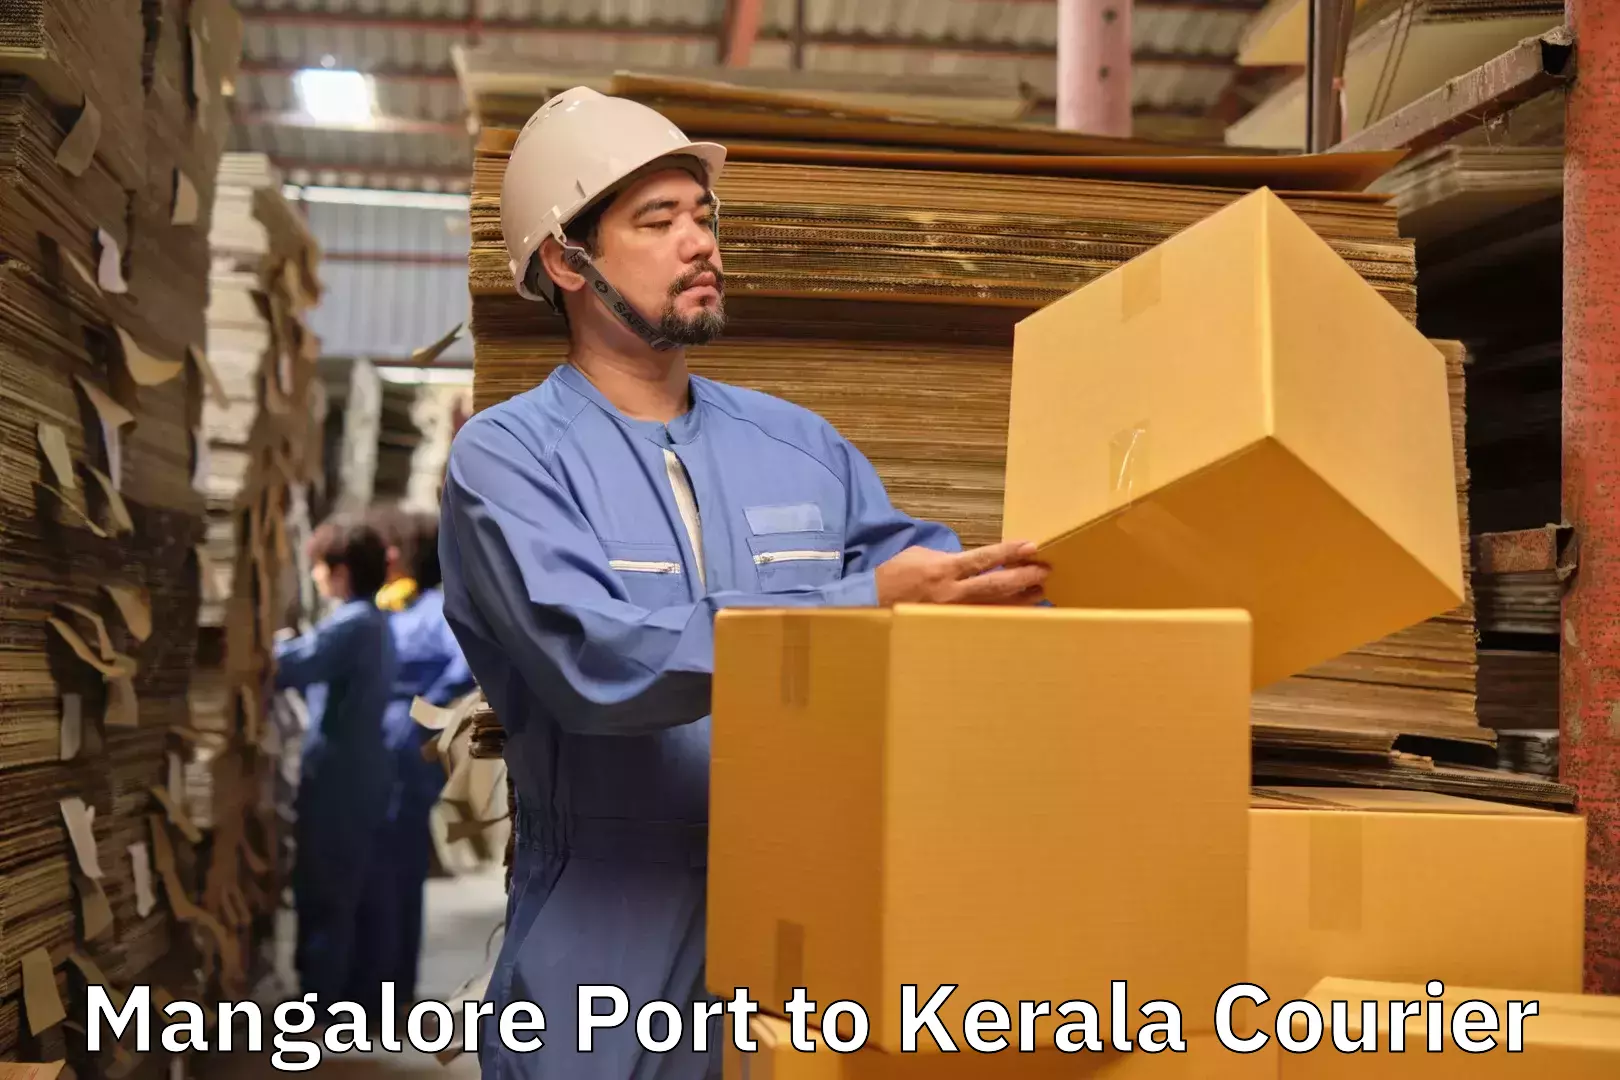 Luggage transport consultancy Mangalore Port to Rajamudy